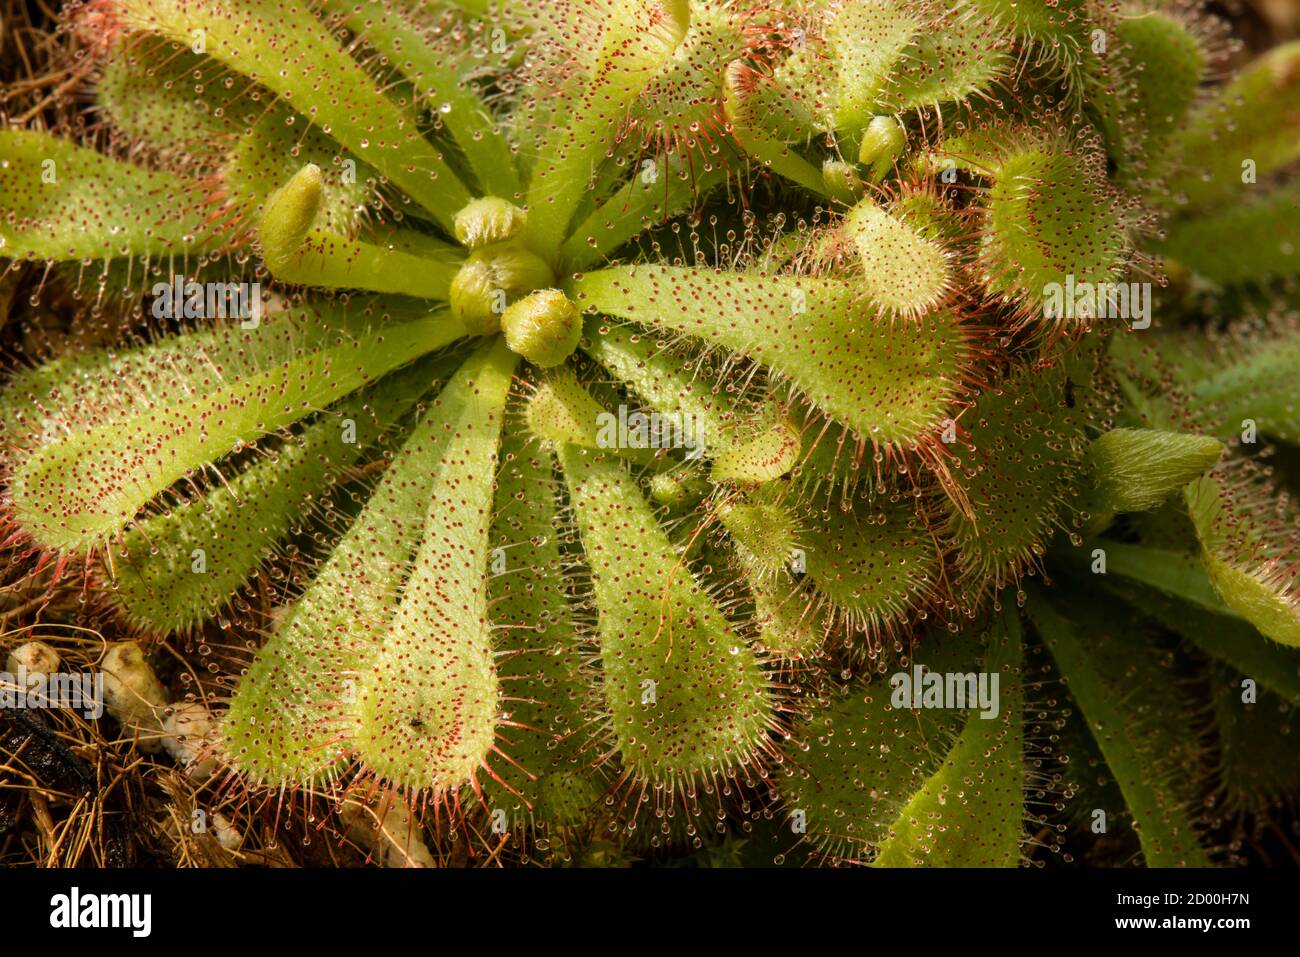 Plants of Drosera, sundew, carnivorous plant, with red mucilaginous sticky glands Stock Photo